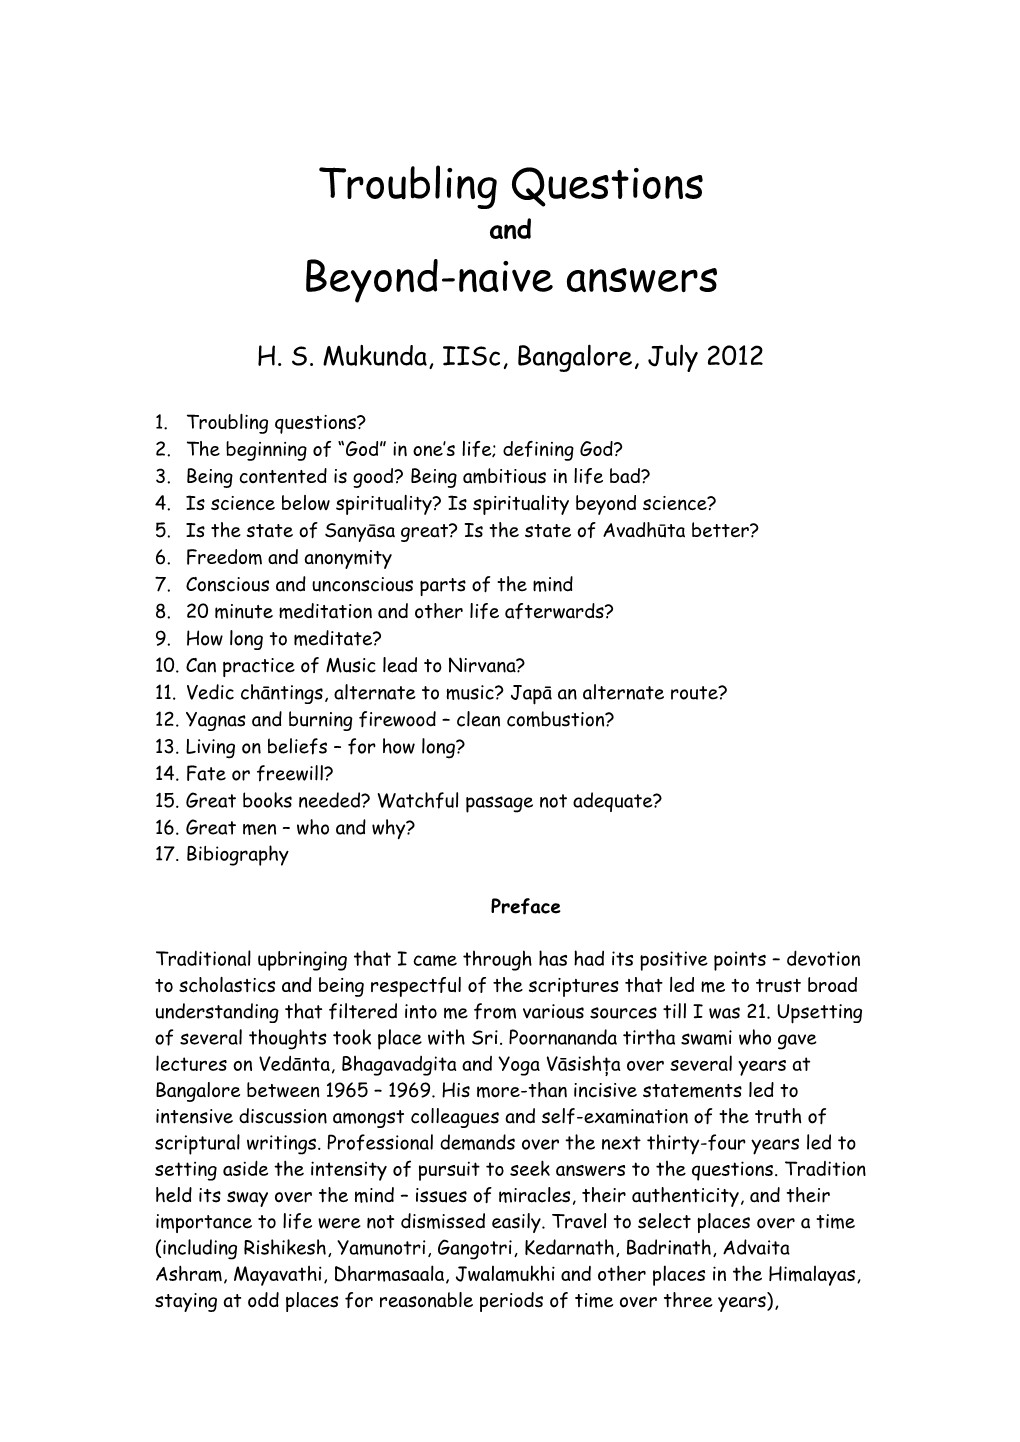 Troubling Questions and Beyond-Naive Answers